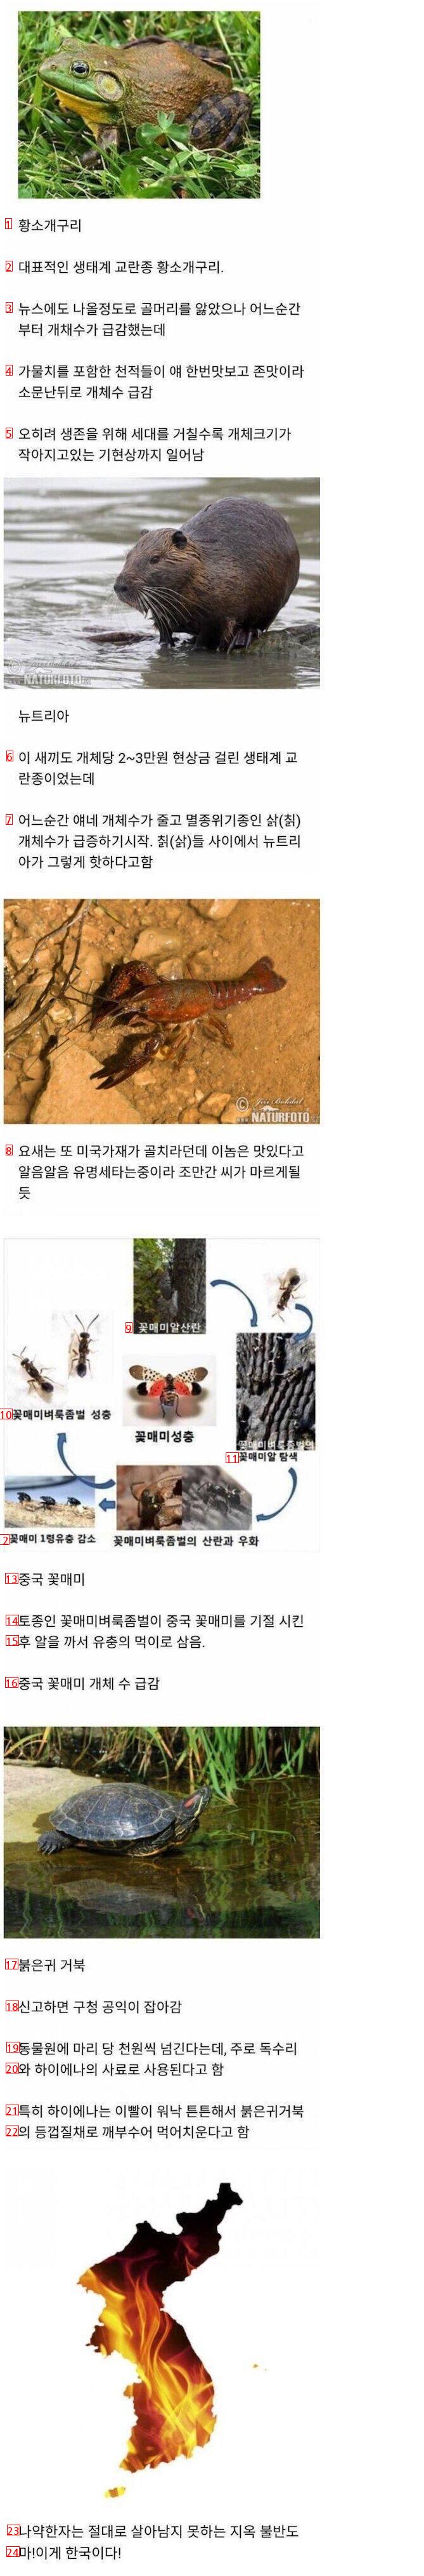 Current status of foreign species that invaded Korea.